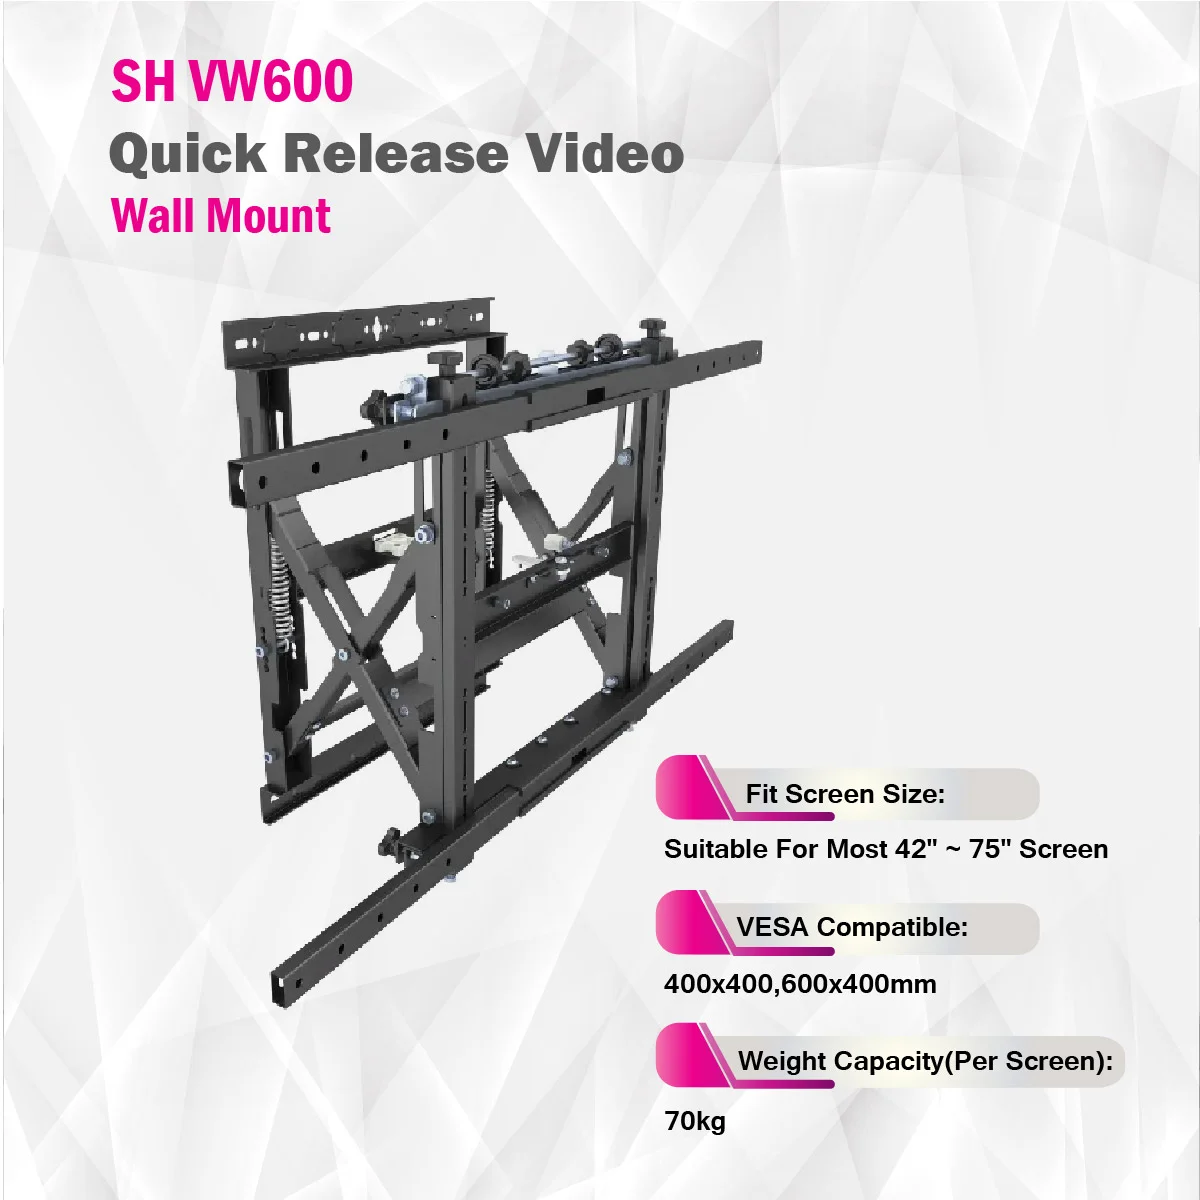 Skill Tech SH VW600 | Quick Release Video Wall Mount